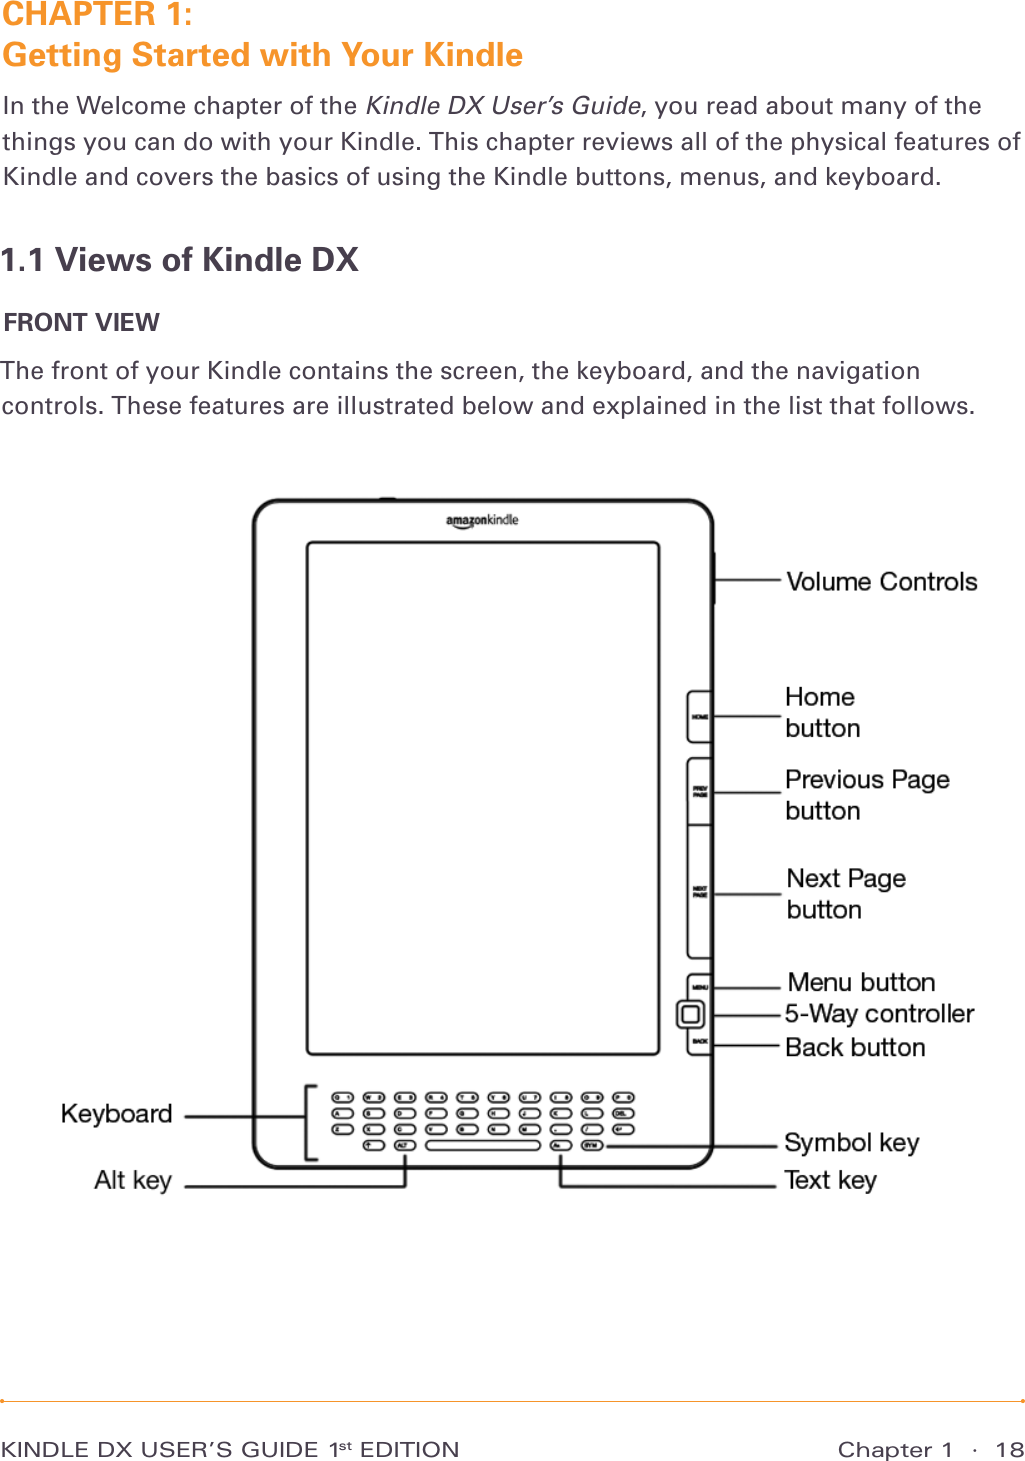 Chapter 1  ·  18KINDLE DX USER’S GUIDE 1st EDITIONCHAPTER 1: Getting Started with Your KindleIn the Welcome chapter of the Kindle DX User’s Guide, you read about many of the things you can do with your Kindle. This chapter reviews all of the physical features of Kindle and covers the basics of using the Kindle buttons, menus, and keyboard.1.1 Views of Kindle DXFRONT VIEW The front of your Kindle contains the screen, the keyboard, and the navigation controls. These features are illustrated below and explained in the list that follows.